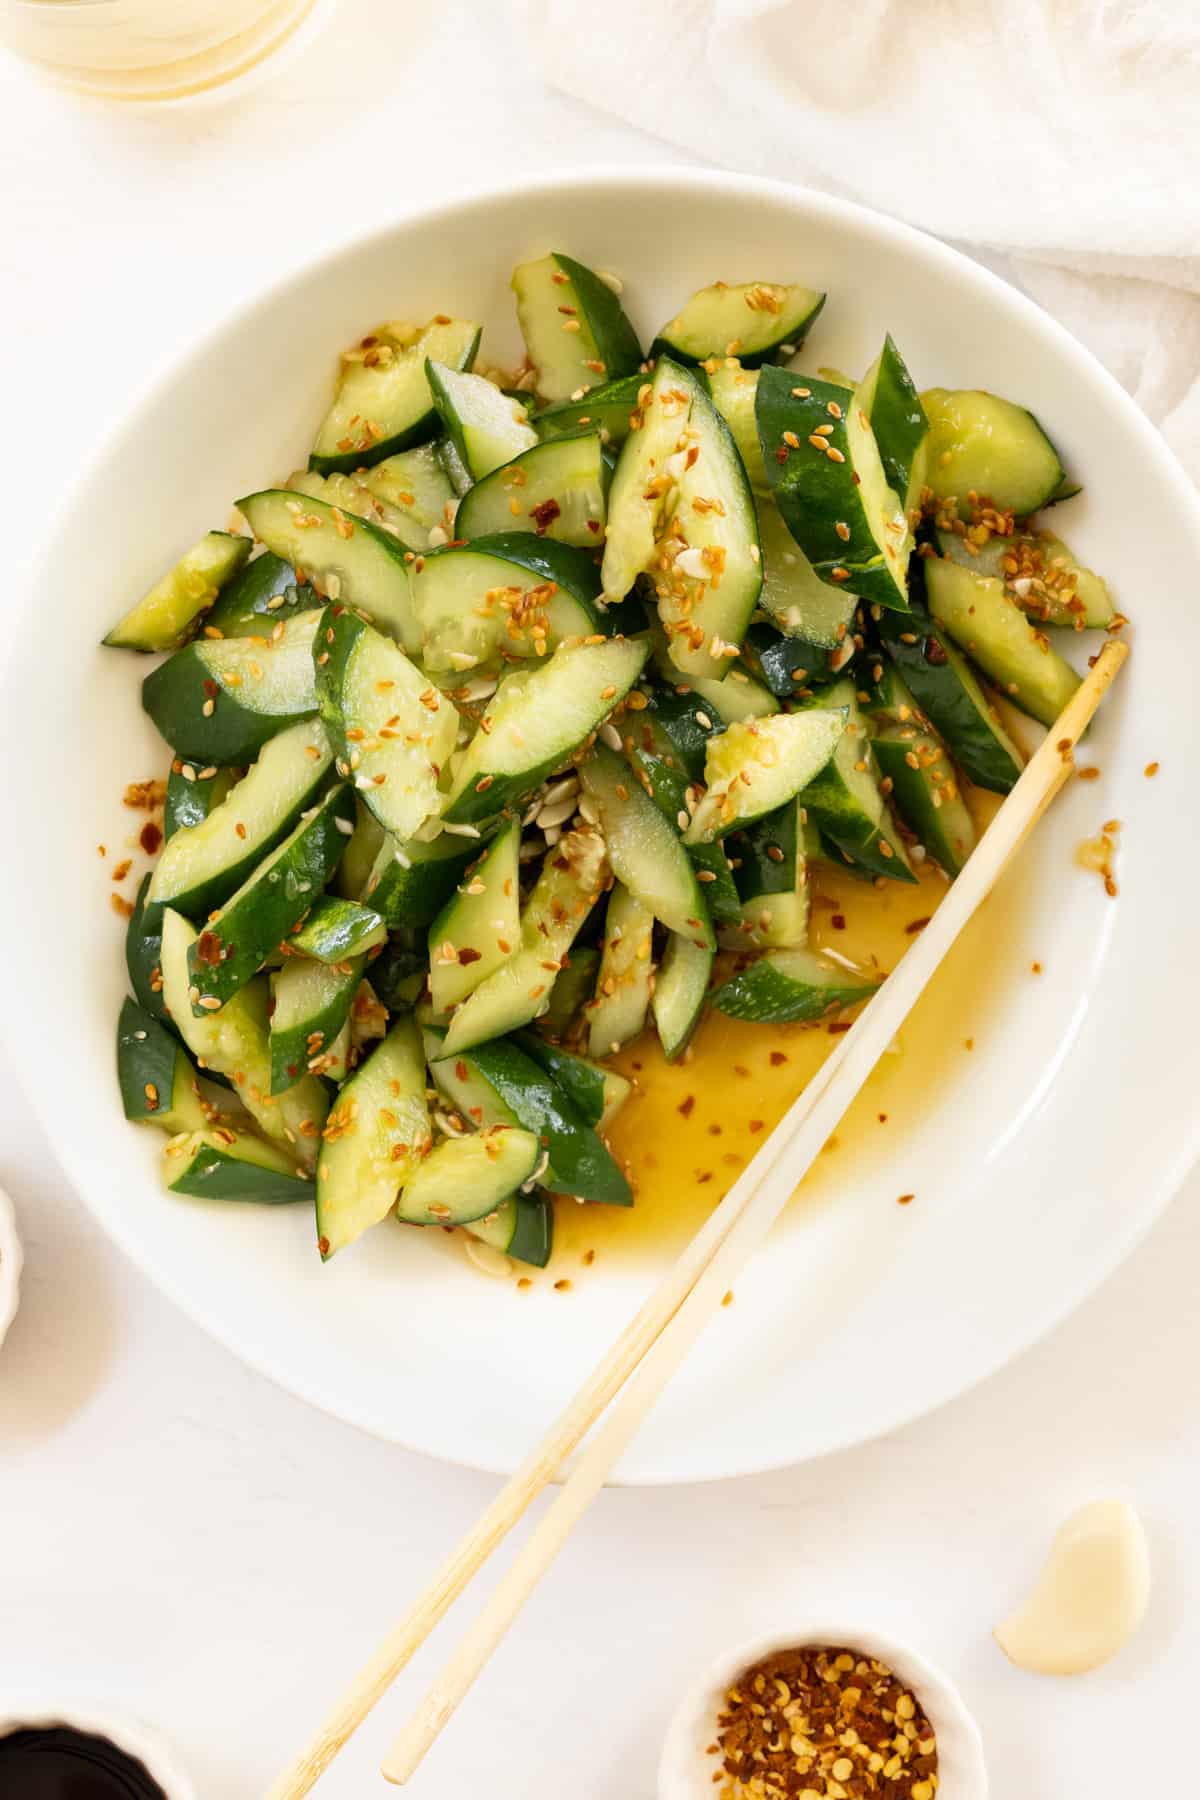 cucumber pieces in a brownish dressing in a white bowl